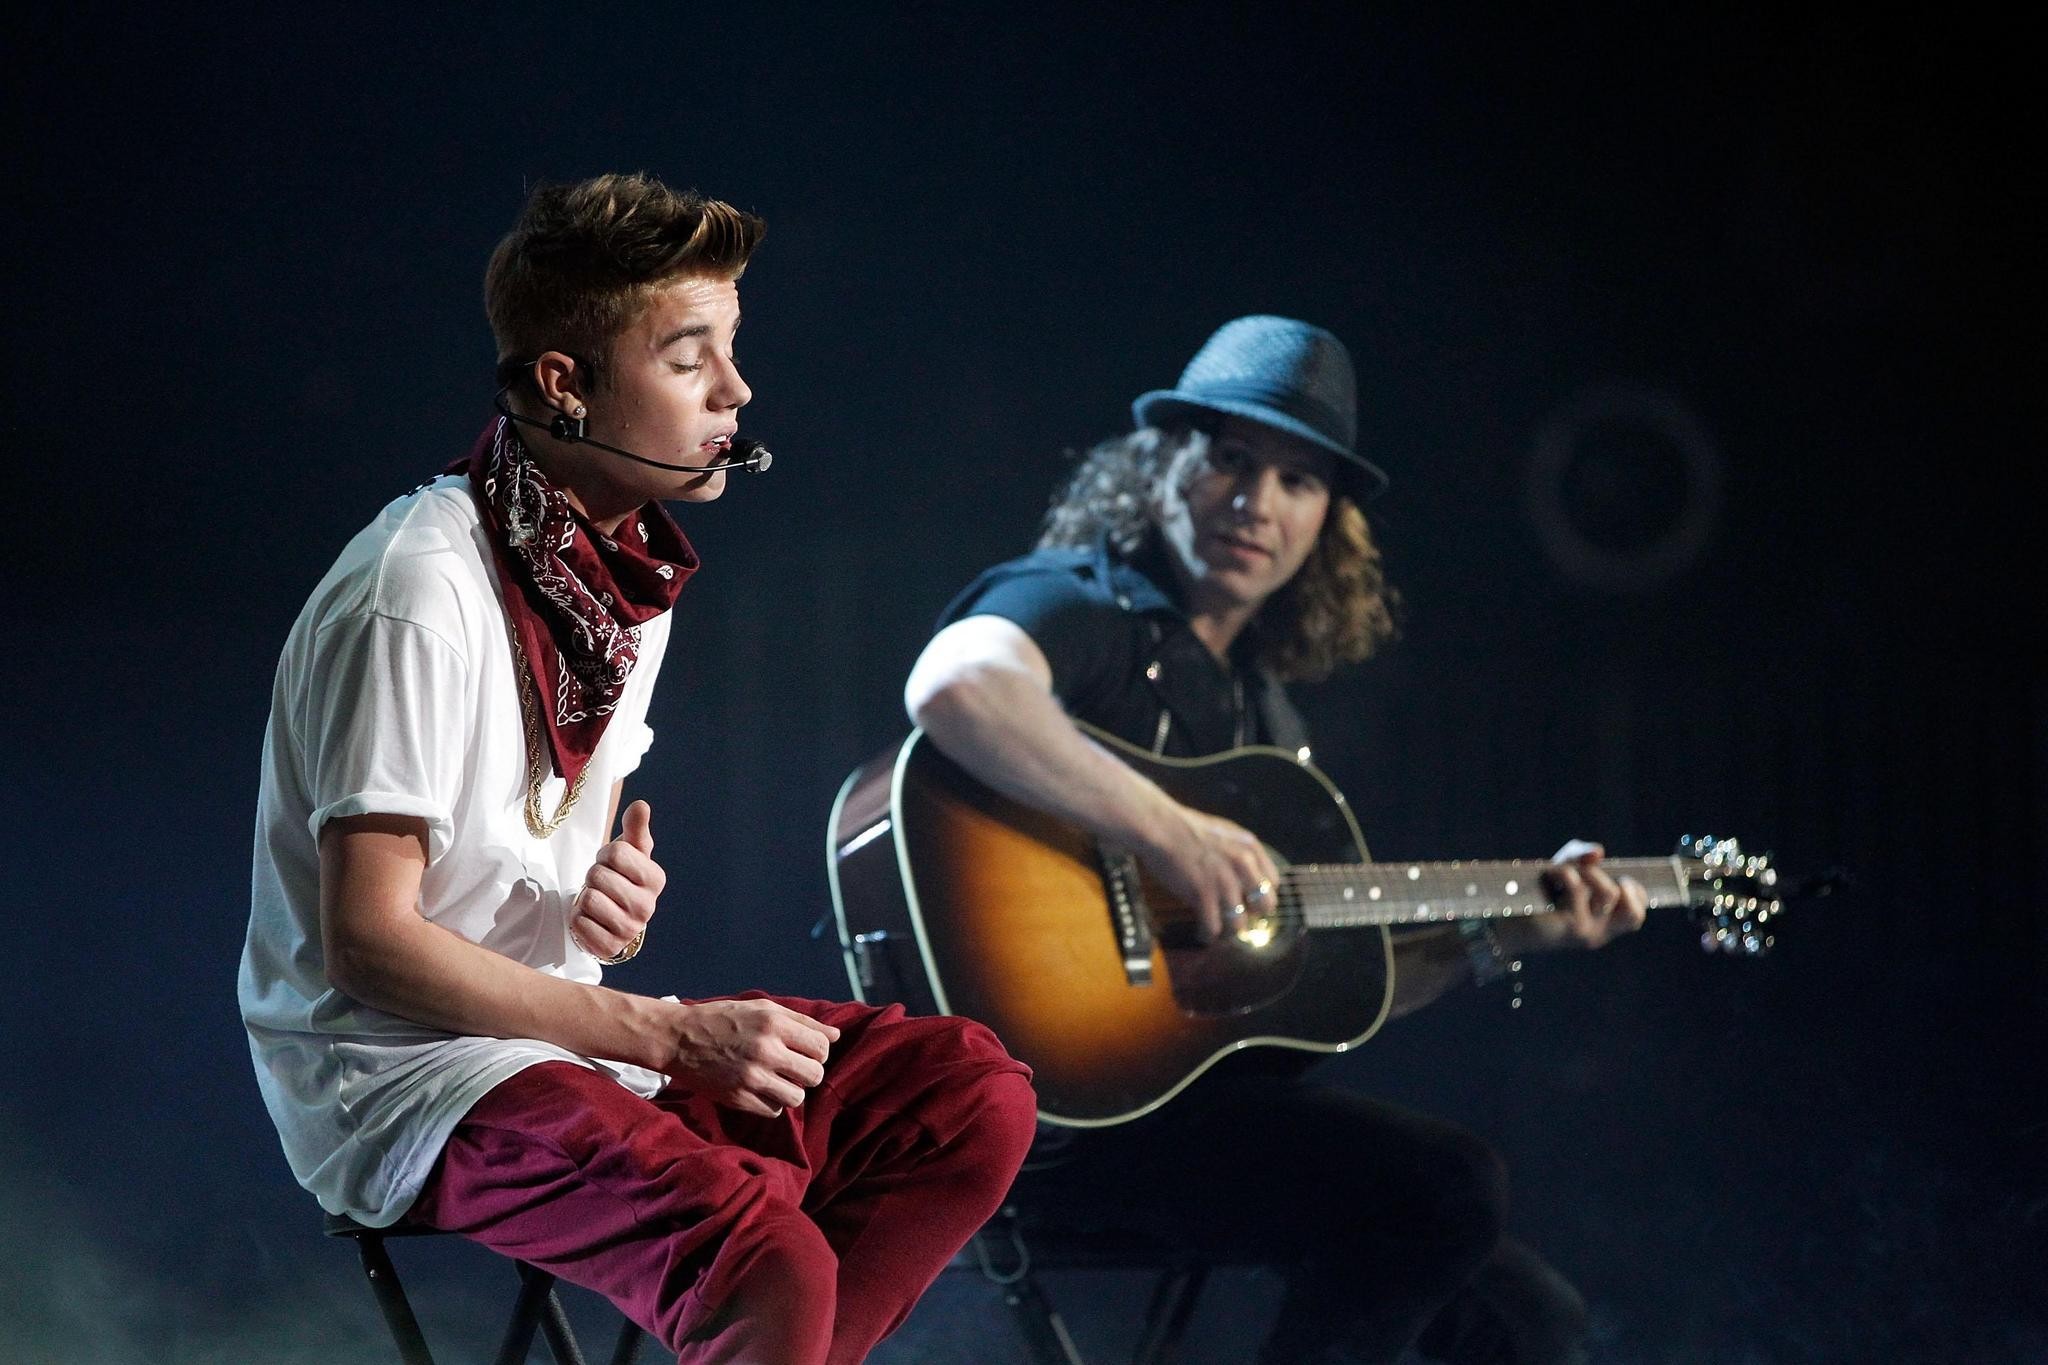 What Songs Are On Justin Bieber’s “Believe Acoustic” Album